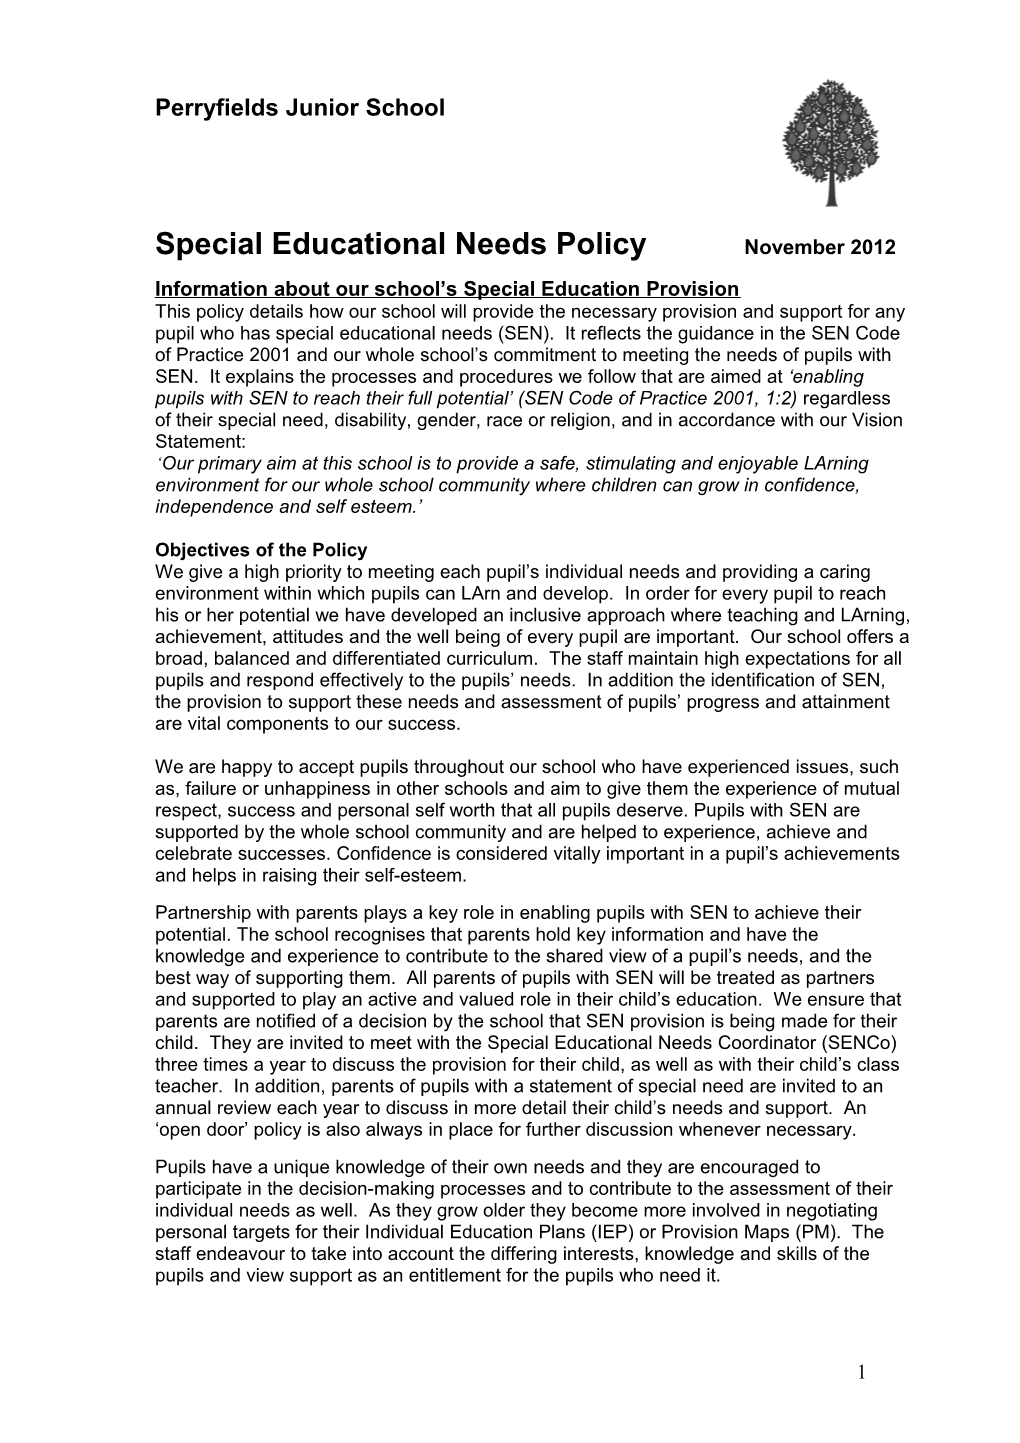 Special Educational Needs Policy s1